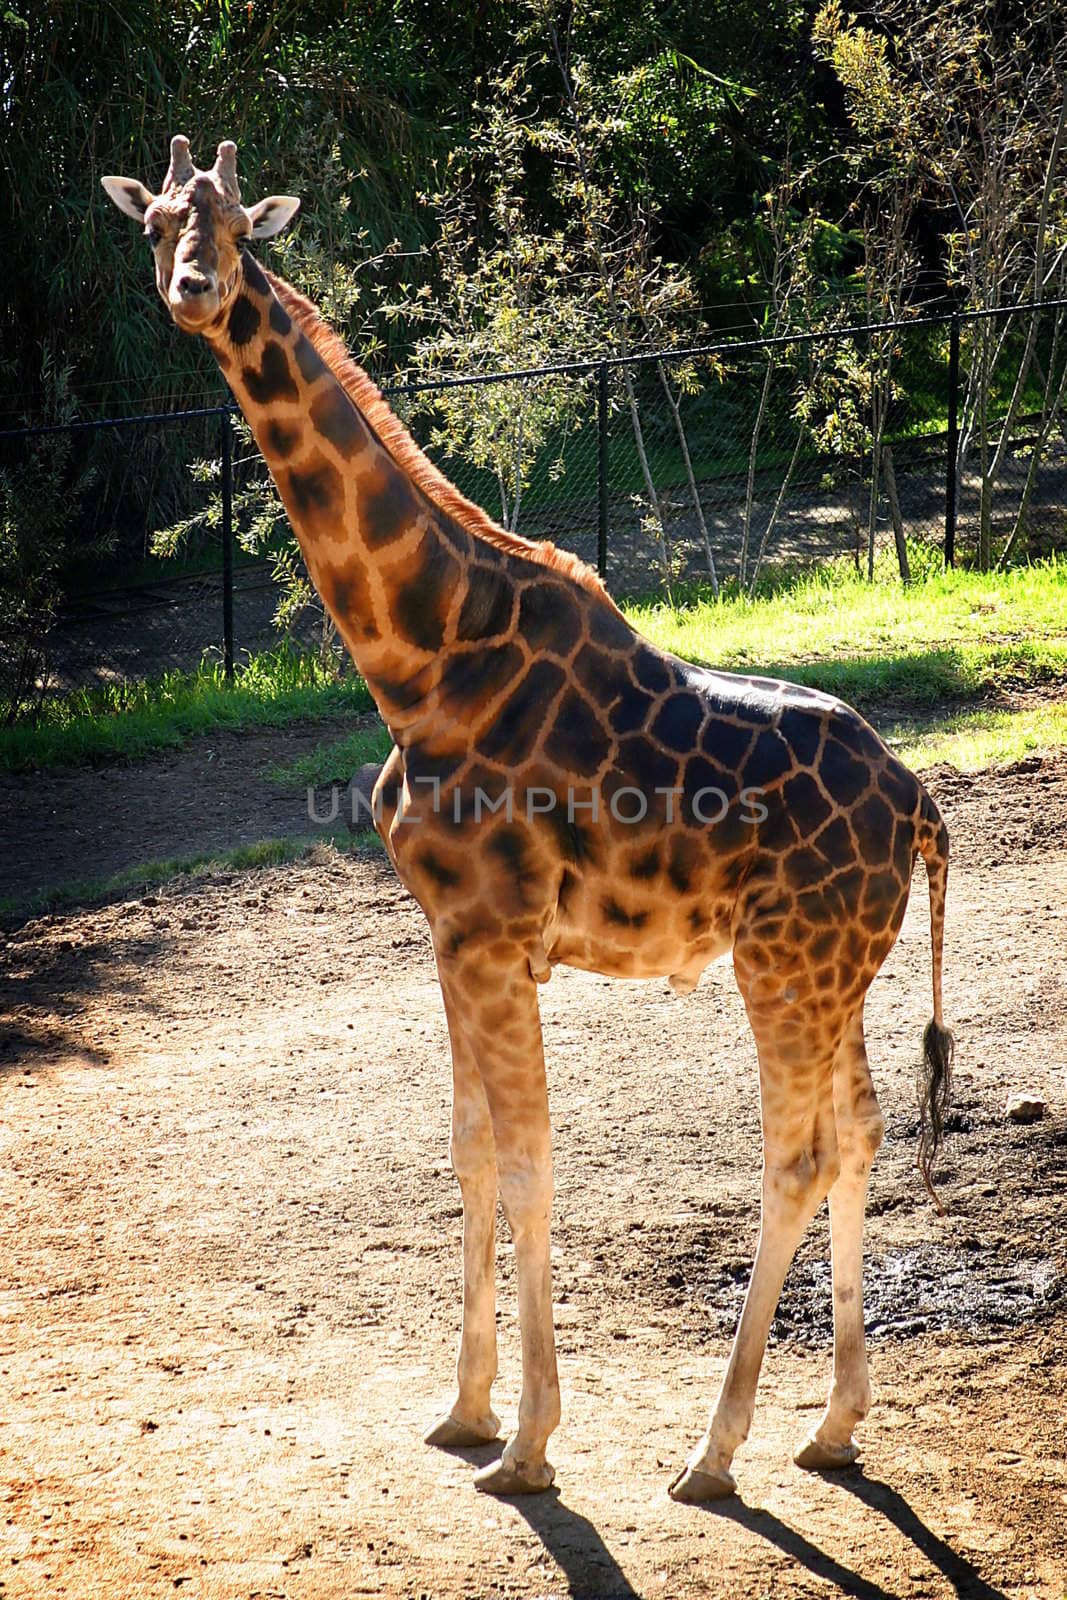 The Rothschild Giraffe also known as the Baringo Giraffe or as the Ugandan Giraffe is one of the most endangered giraffe subspecies.